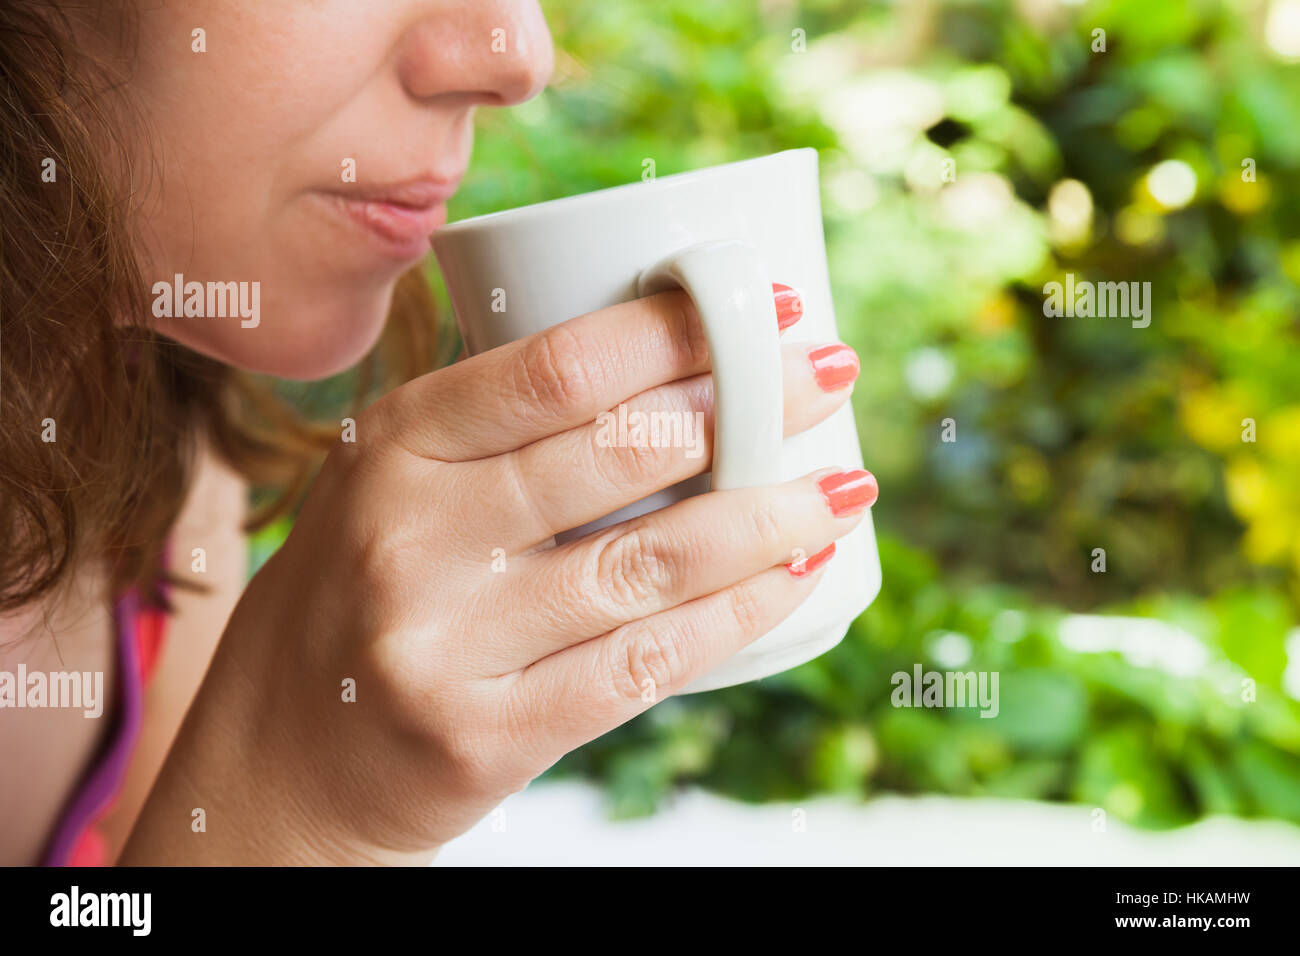 Young Caucasian woman drinks coffee from white cup. Close-up outdoor photo, selective focus on hand Stock Photo